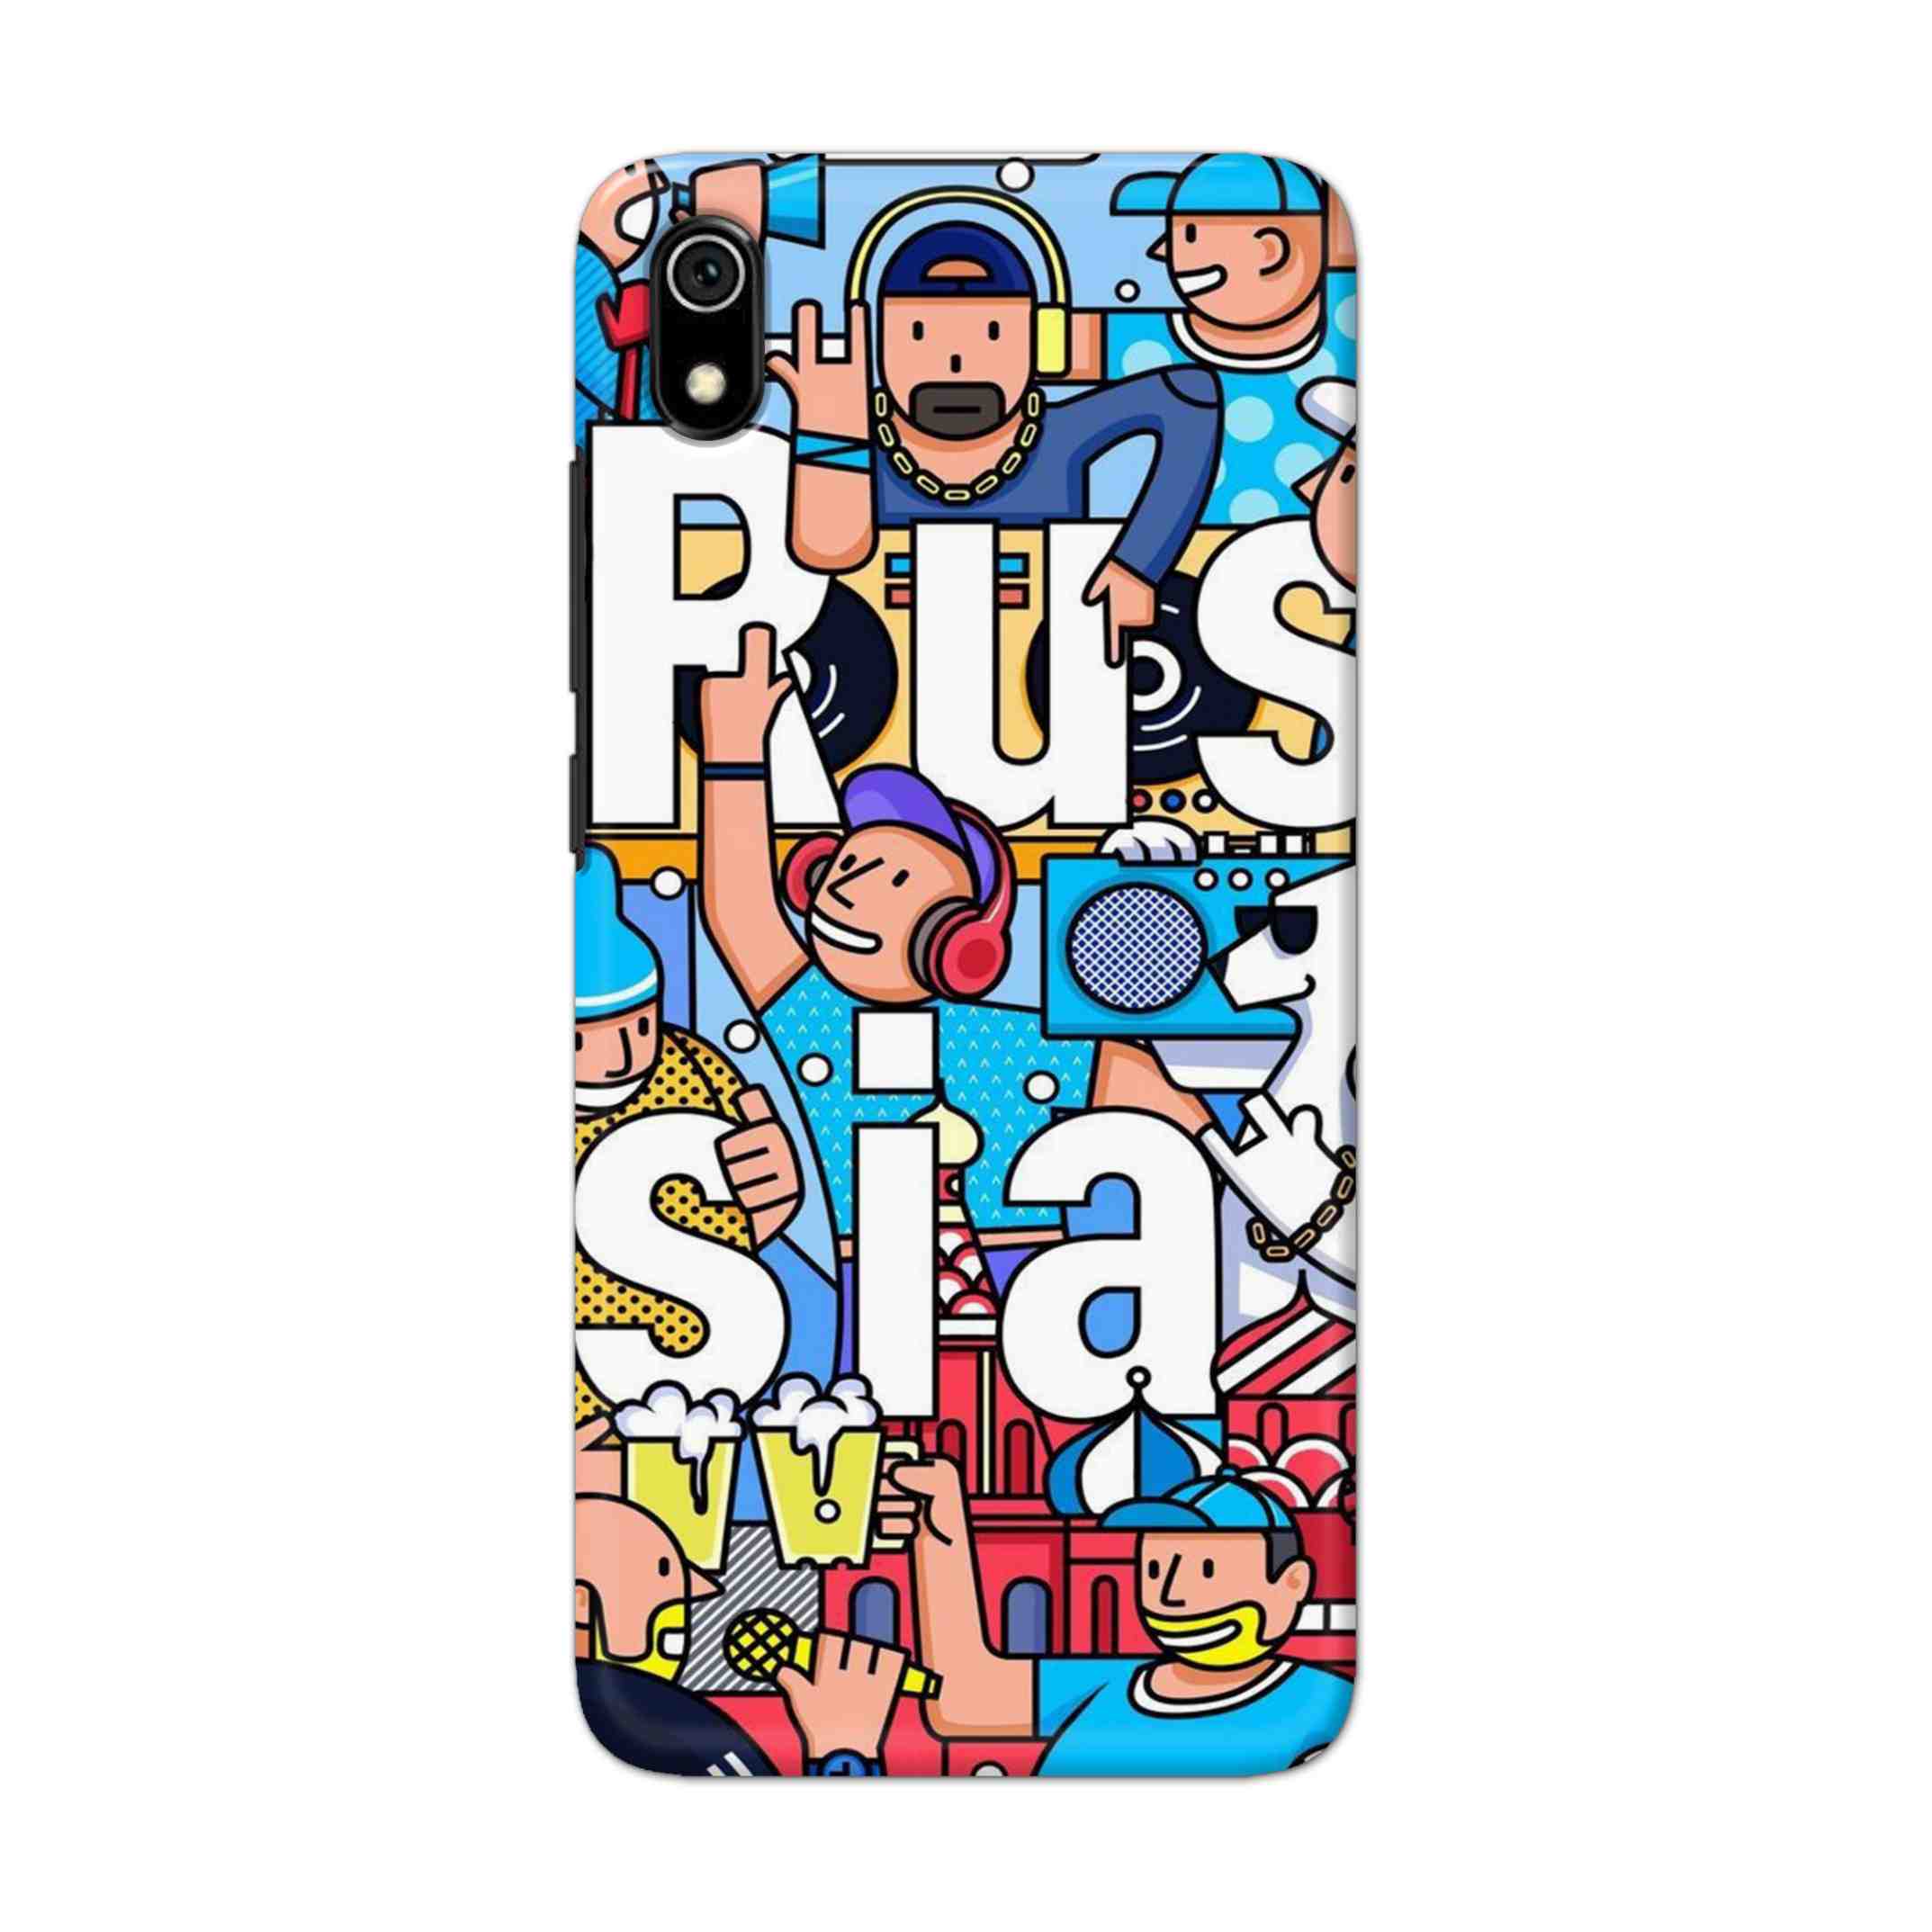 Buy Russia Hard Back Mobile Phone Case Cover For Xiaomi Redmi 7A Online